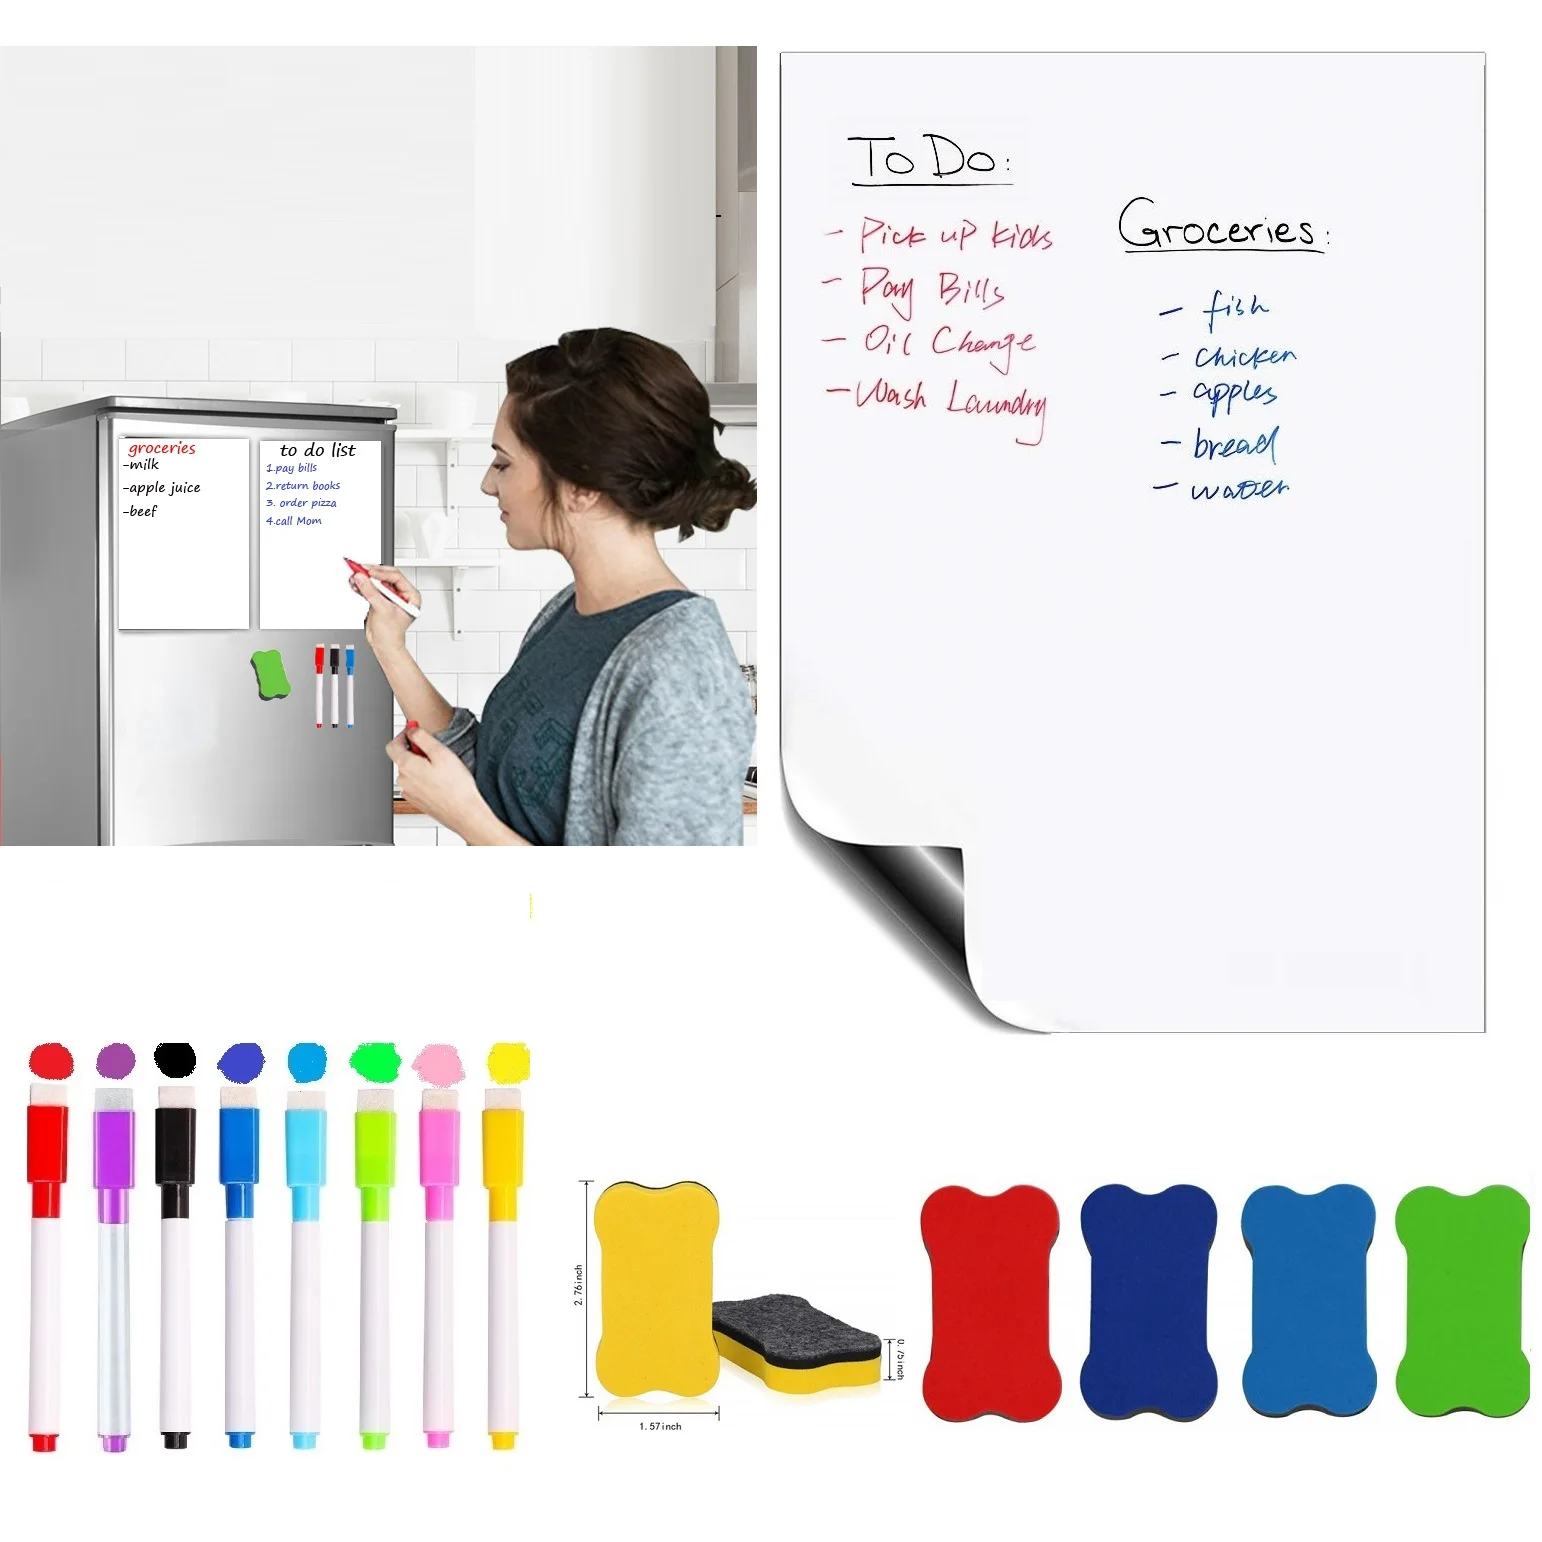 Details about   5 Dry Wipe Magnetic Fridge Whiteboard Home Notice Memo Message Board with 3 Pen 